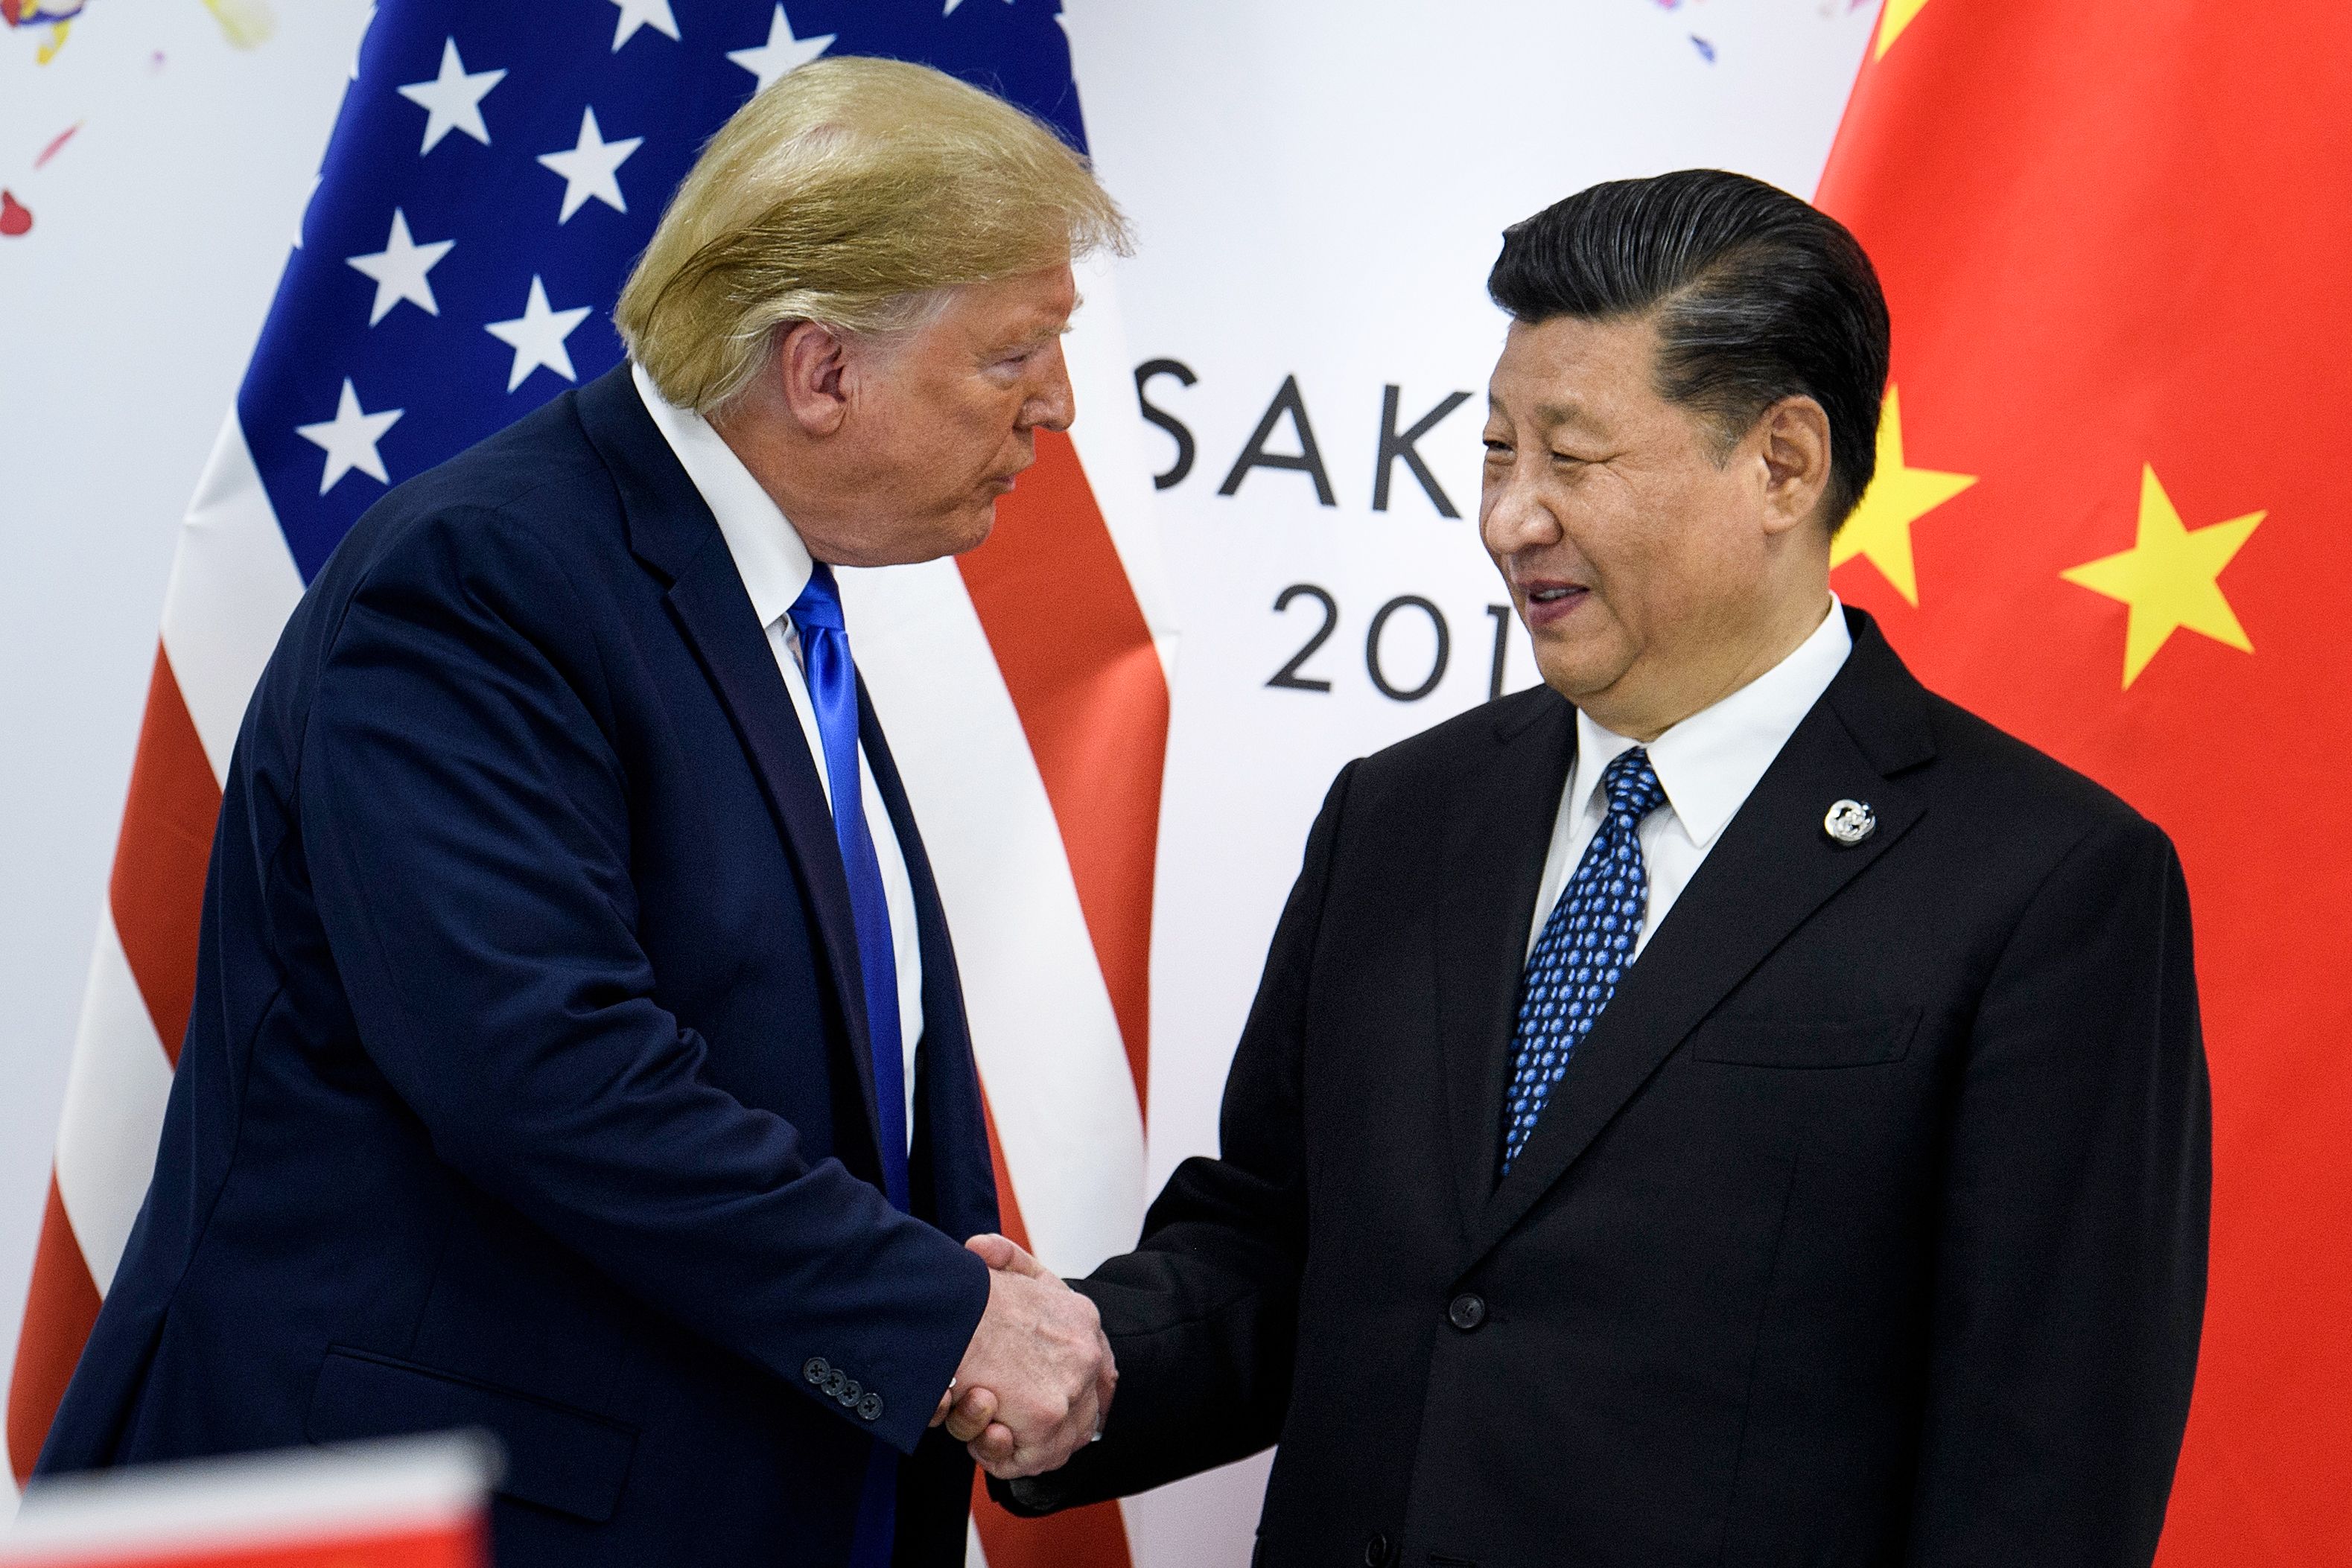 President Donald Trump and Chinese President Xi Jinping at the G20 Summit in Osaka on June 28, 2019.